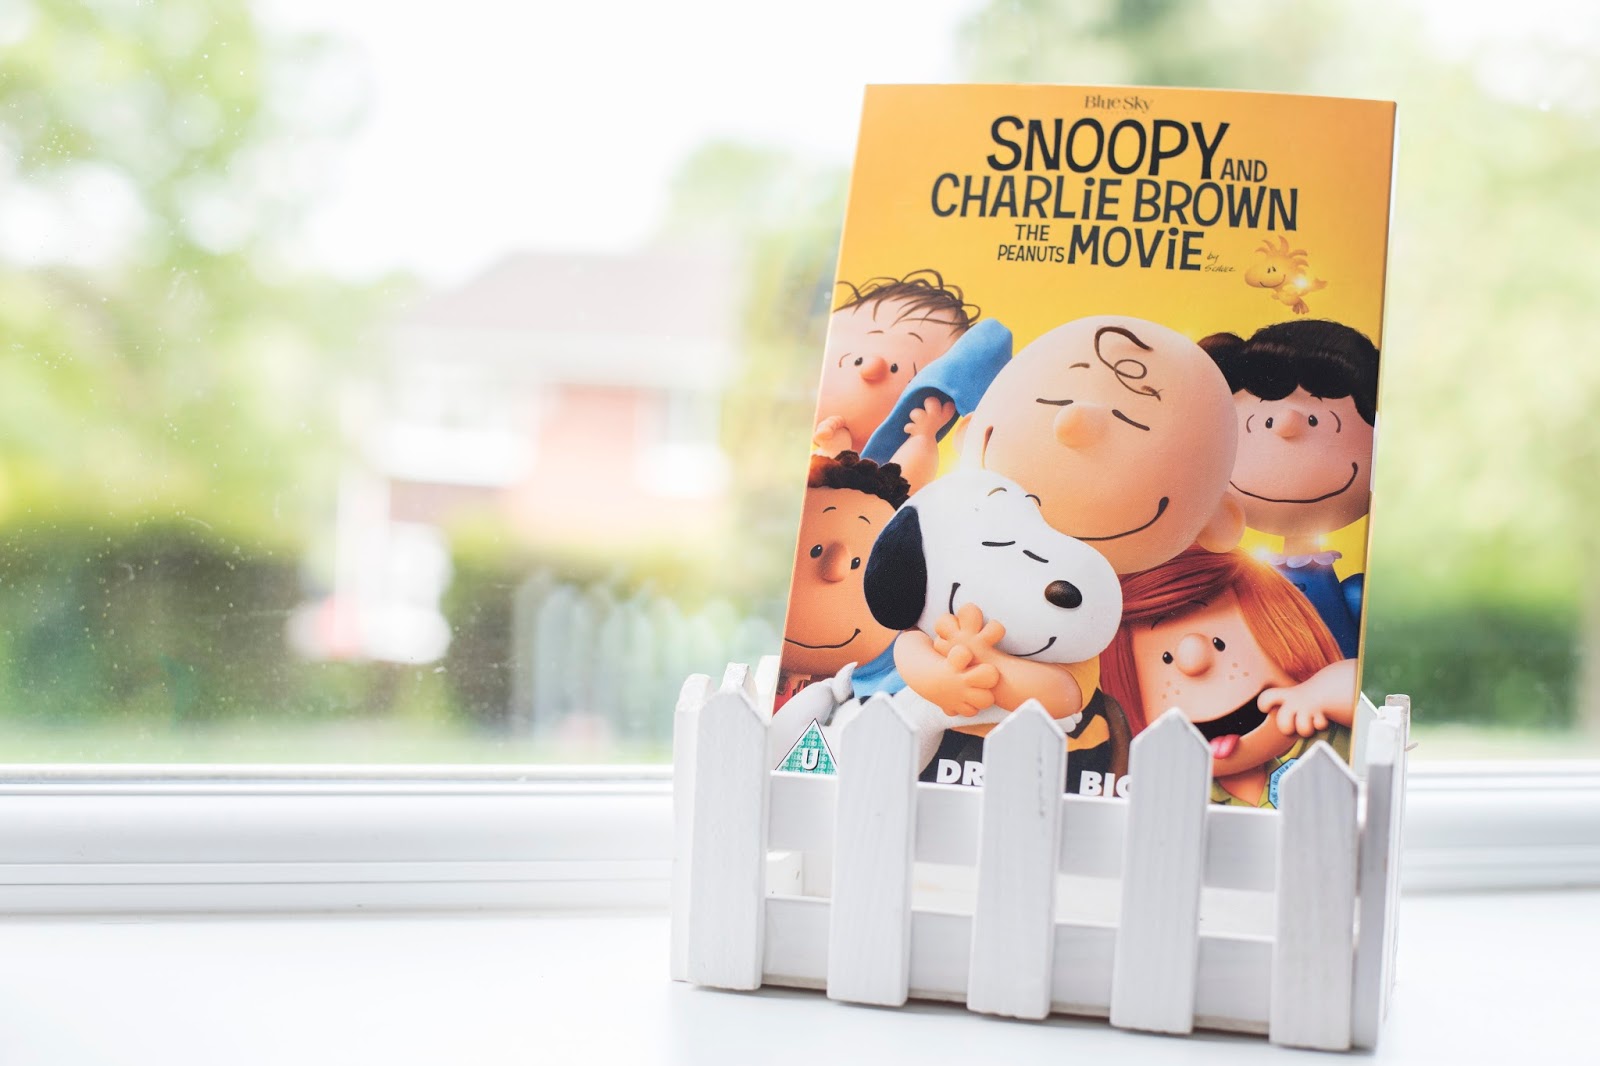 CHARLIE BROWN AND SNOOPY: THE PEANUTS MOVIE